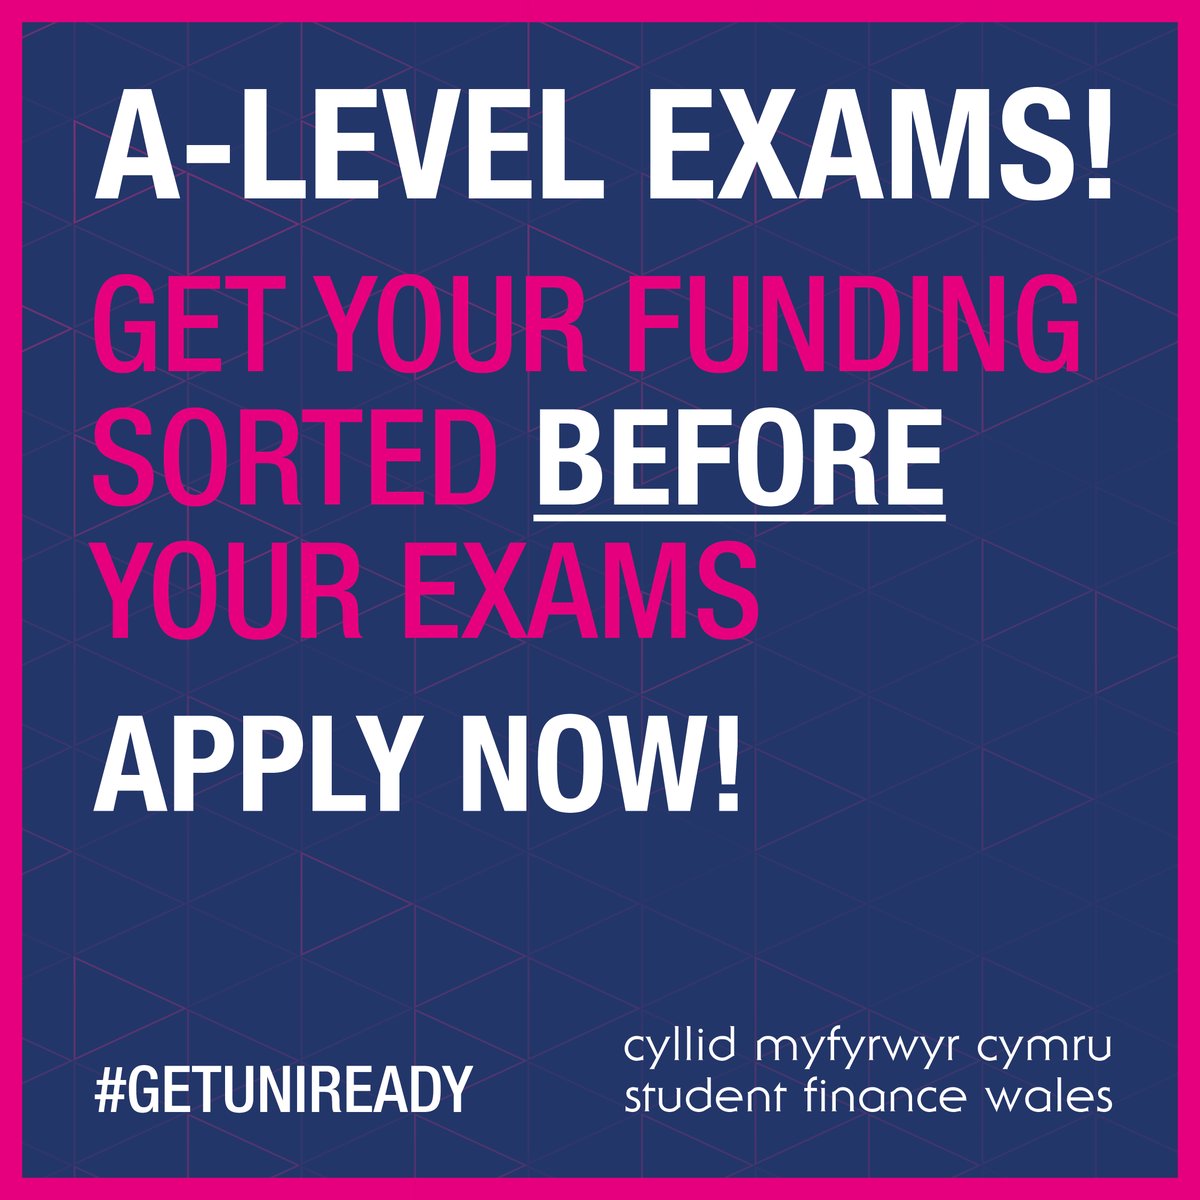 Apply before your exams so we have time to process your application!

It takes 6 to 8 weeks to fully assess your application, so don’t wait till after your exams!

#GetUniReady and apply now!

studentfinancewales.co.uk/discover-stude…